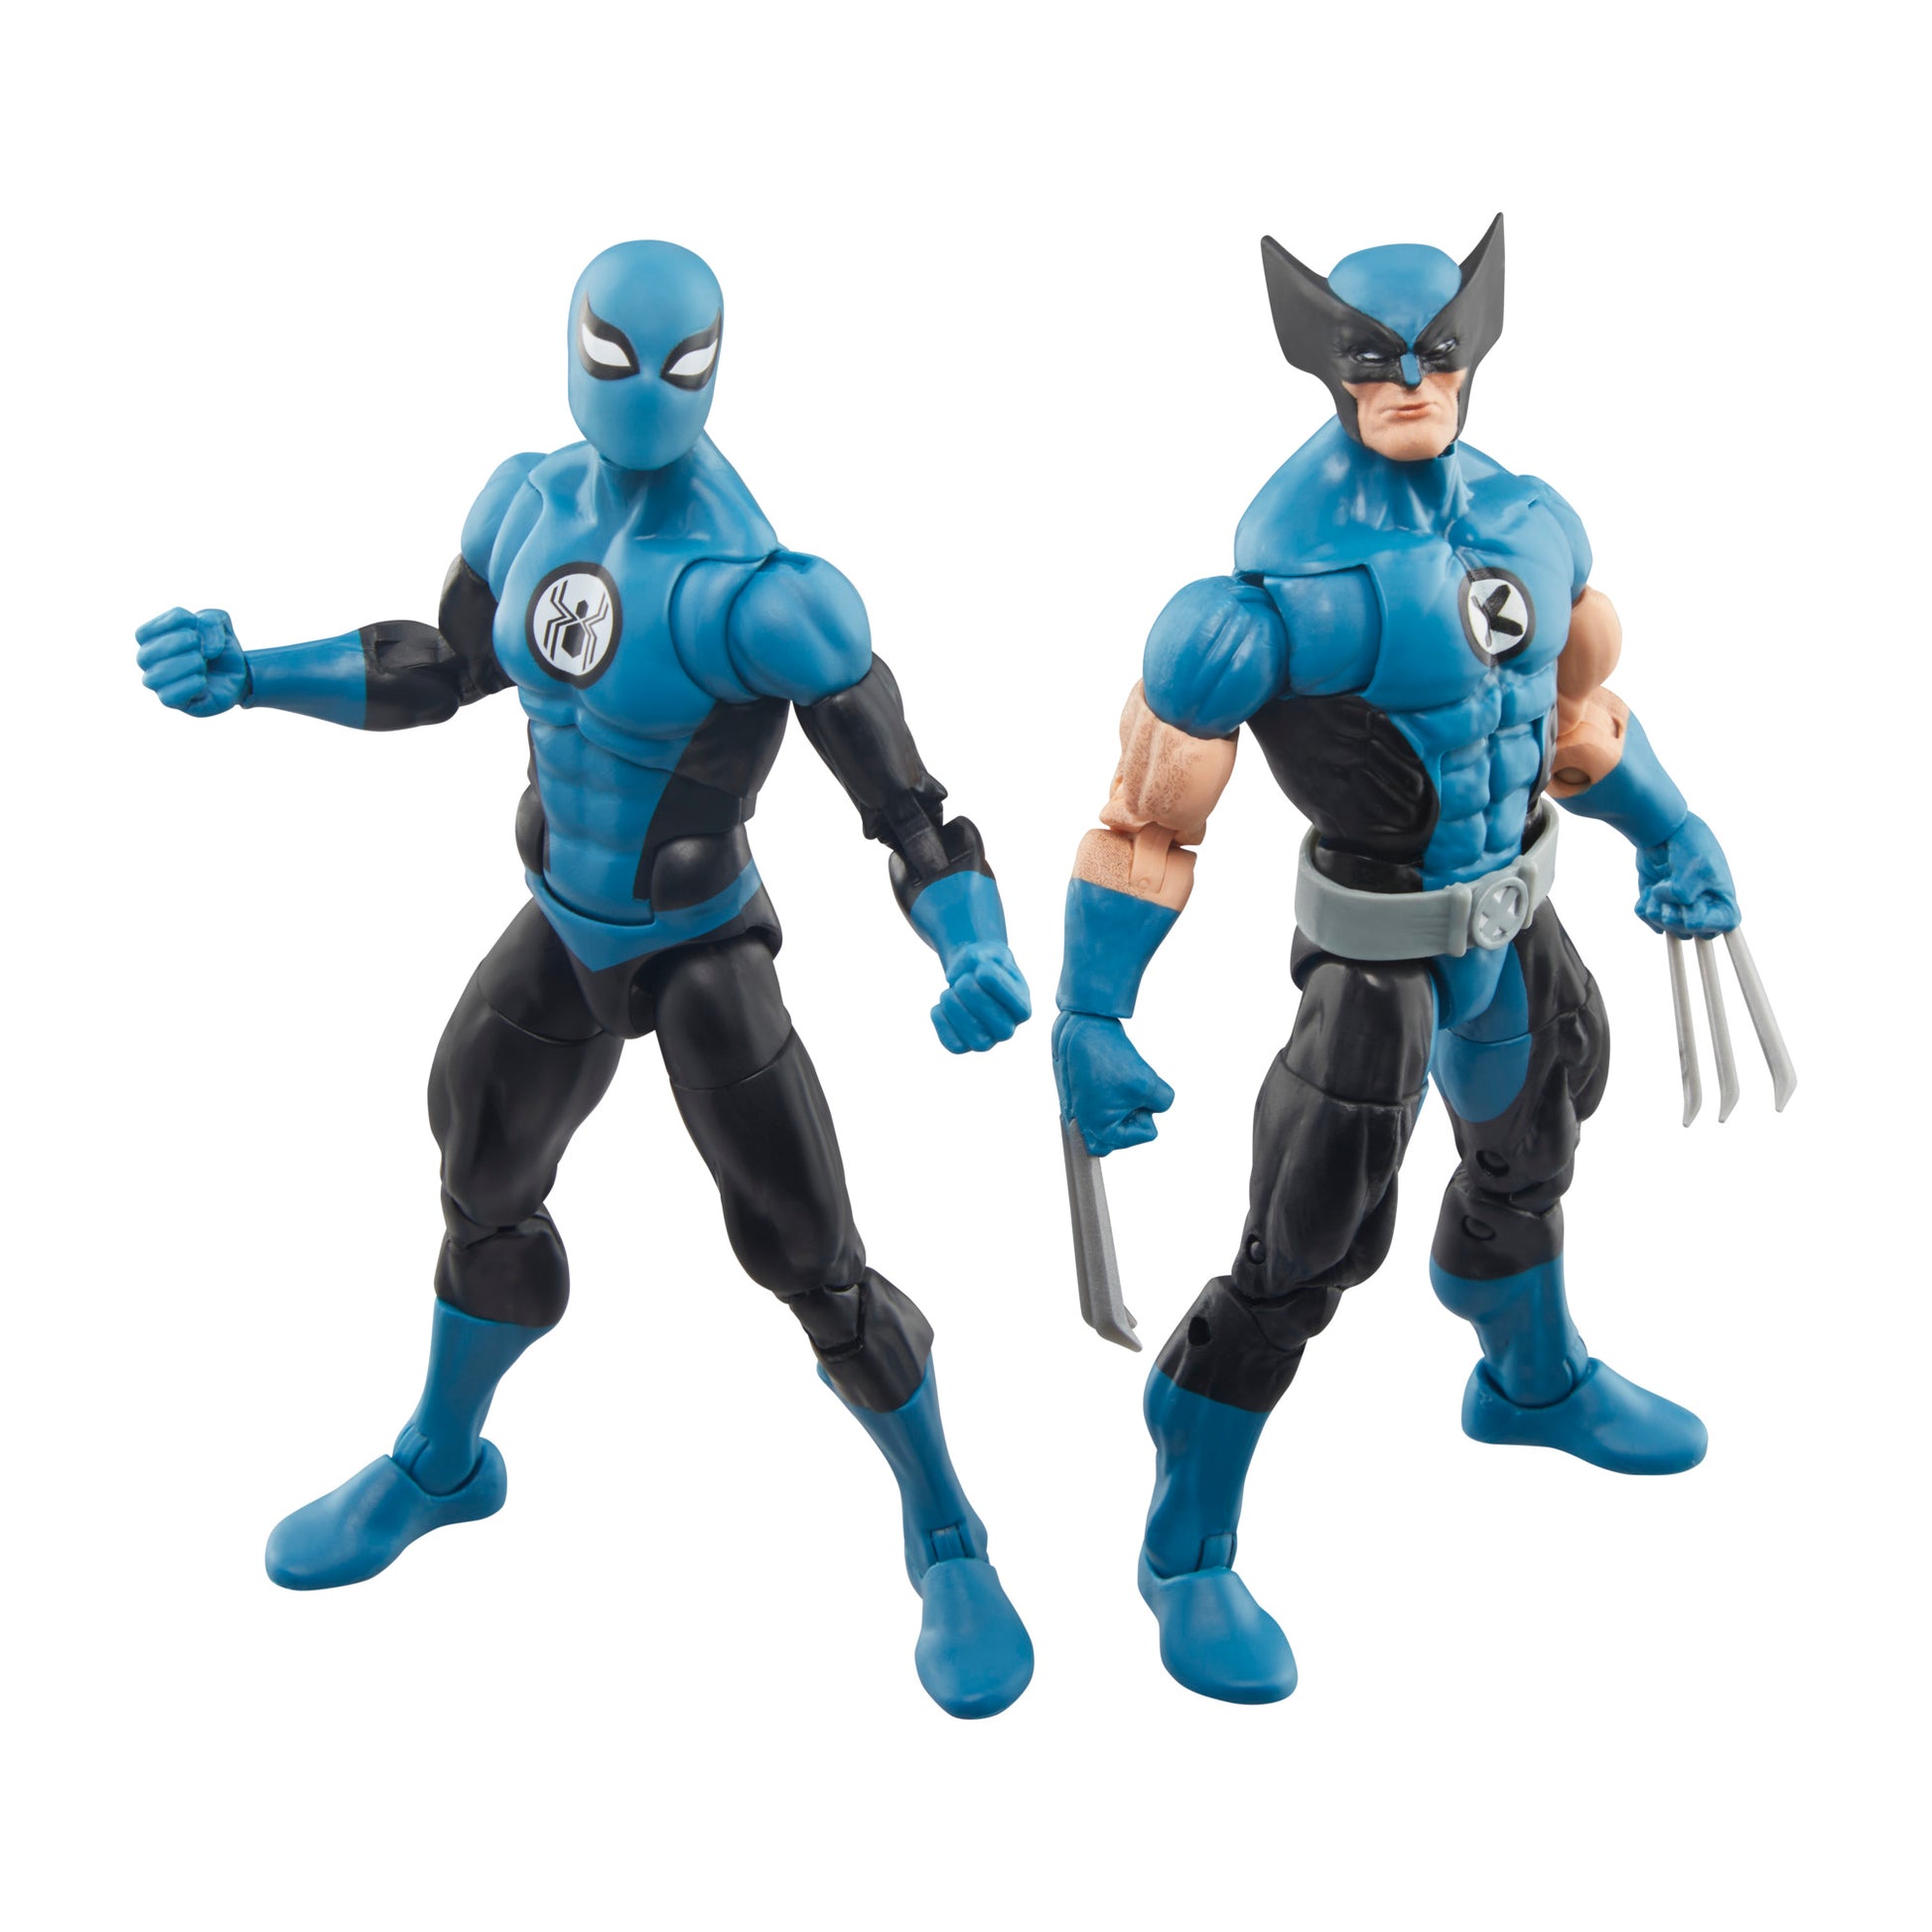 Marvel Legends Series Wolverine and Spider-Man, Fantastic Four Comics Collectible 6-Inch Action Figure 2-Pack